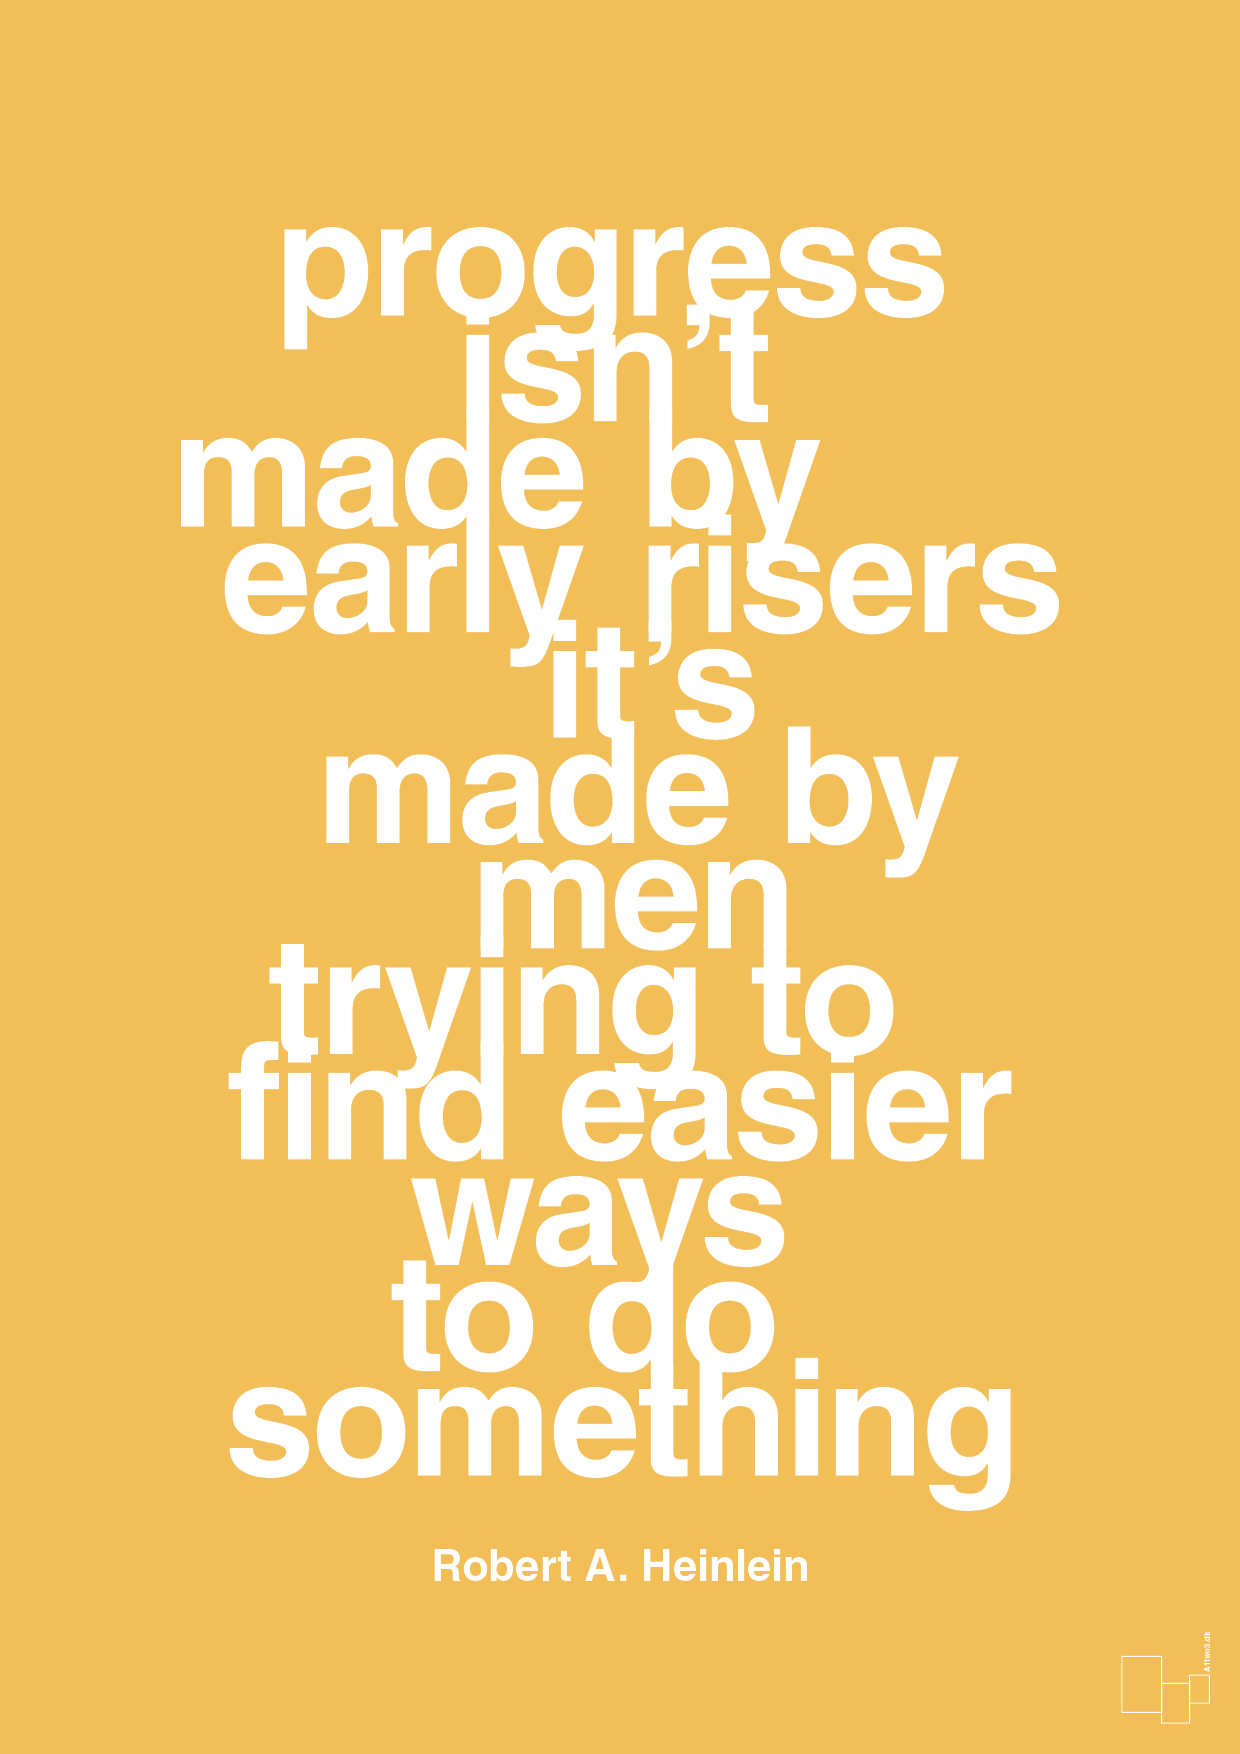 progress isnt made by early risers - Plakat med Citater i Honeycomb